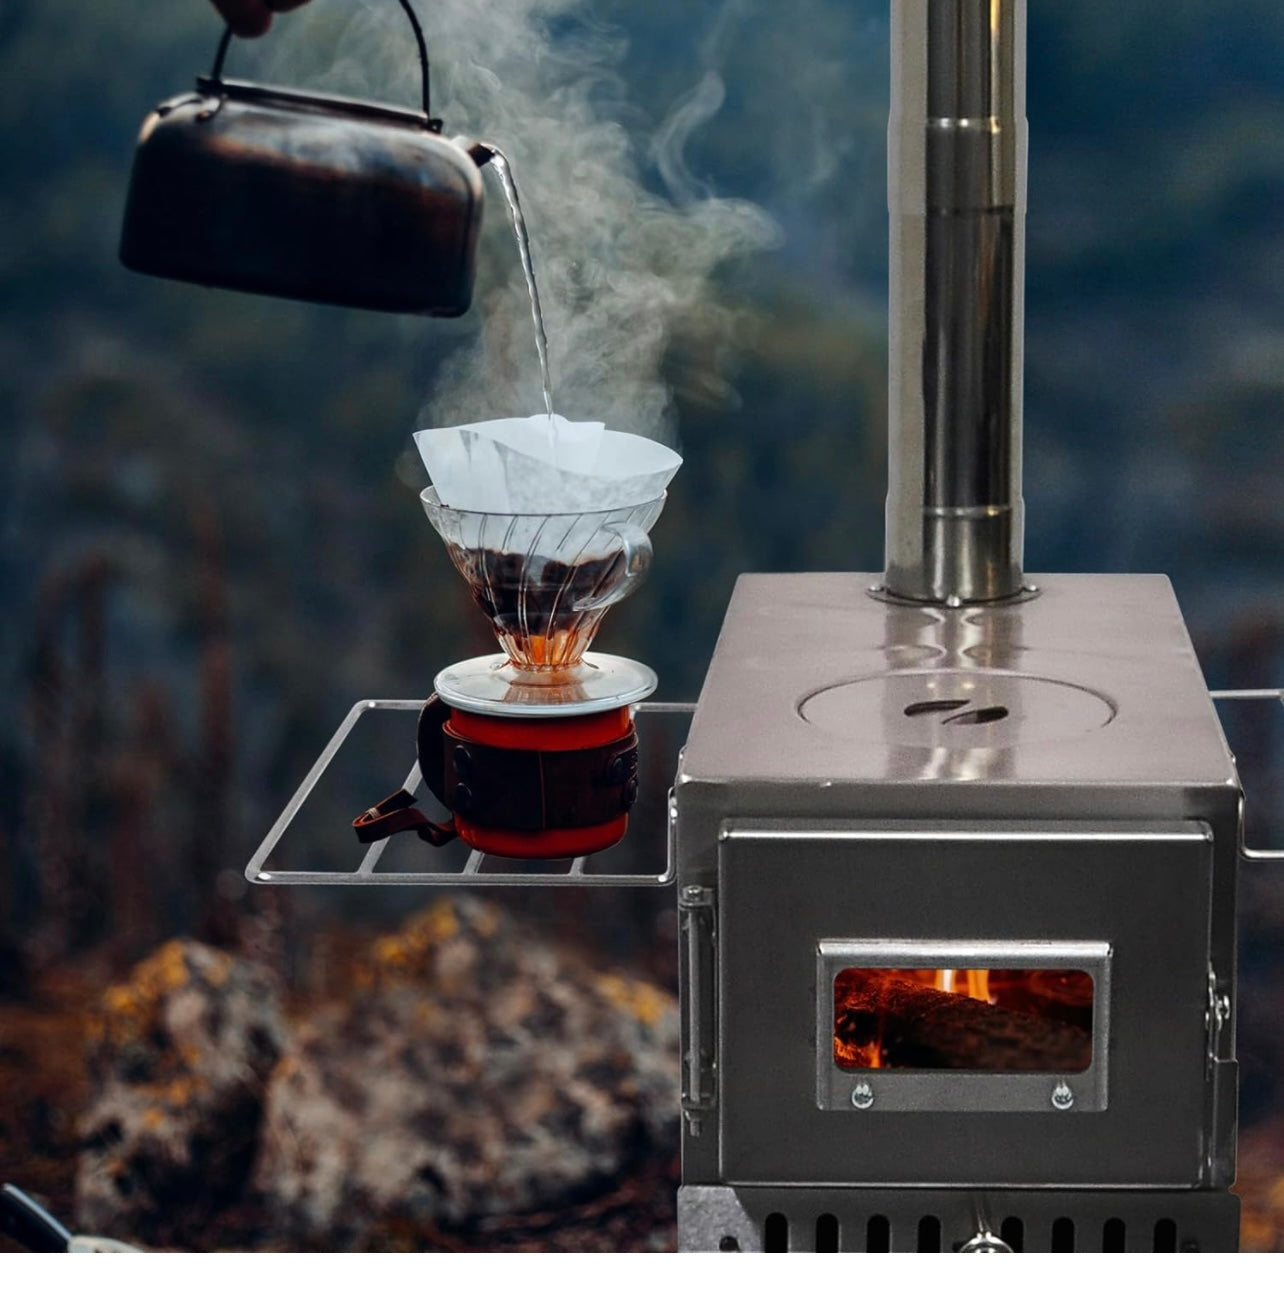 Outdoor Wood Burning Stove, Portable with Chimney Pipe for Cooking, Camping, Tent, Hiking, Fishing, Backpacking